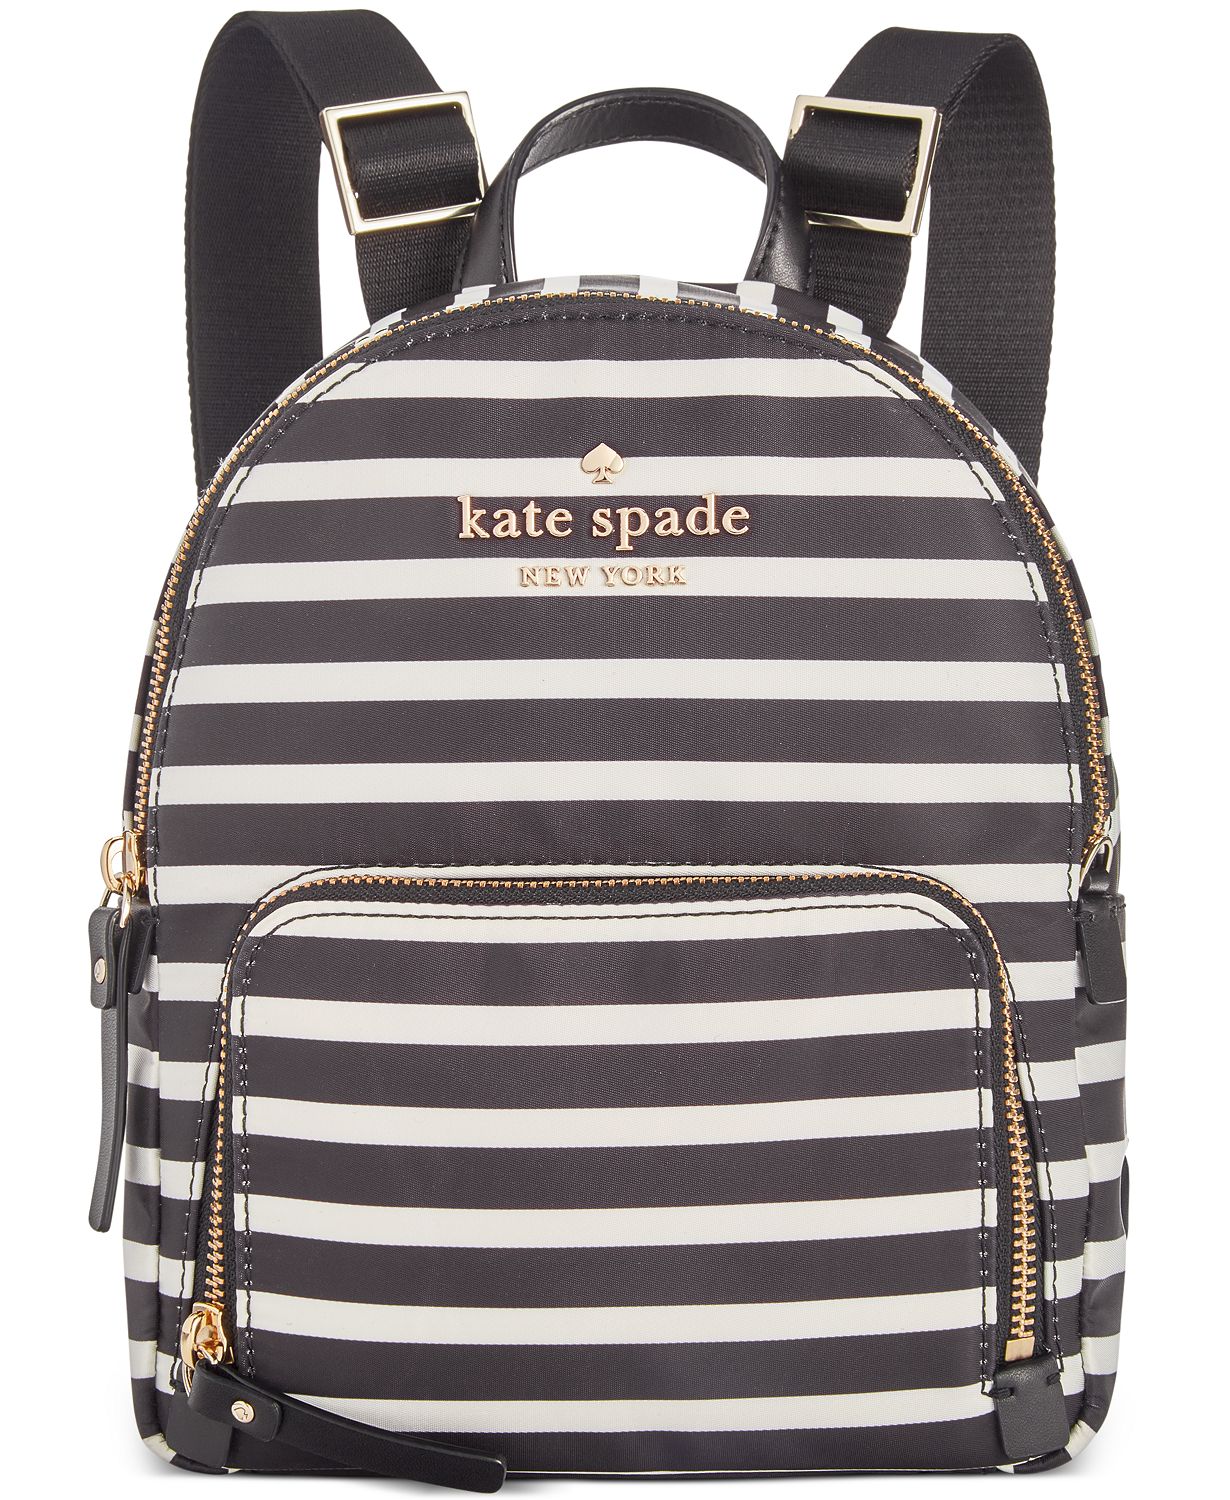 Terrific Kate Spade Purses And Handbags That Will Blow You Away